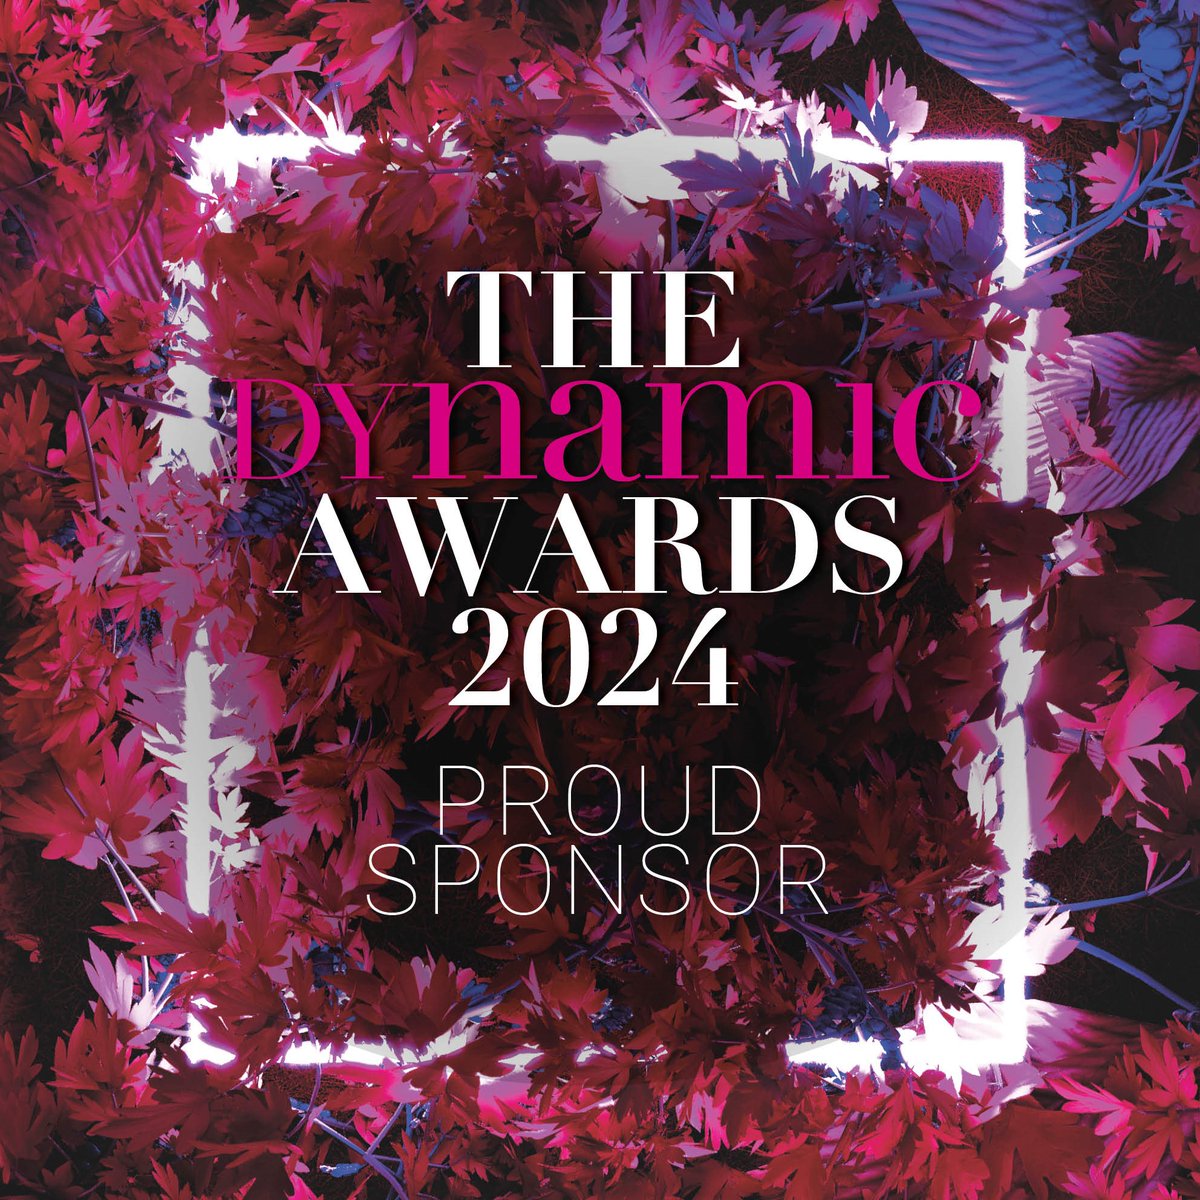 We are delighted to announce our sponsorship of the Best New Business Award at the Dynamic Awards 2024, where we will recognise a businesswoman with entrepreneurial aptitude, vision, ambition, and commercial acumen who has built a successful business from start-up
#DynamicAwards